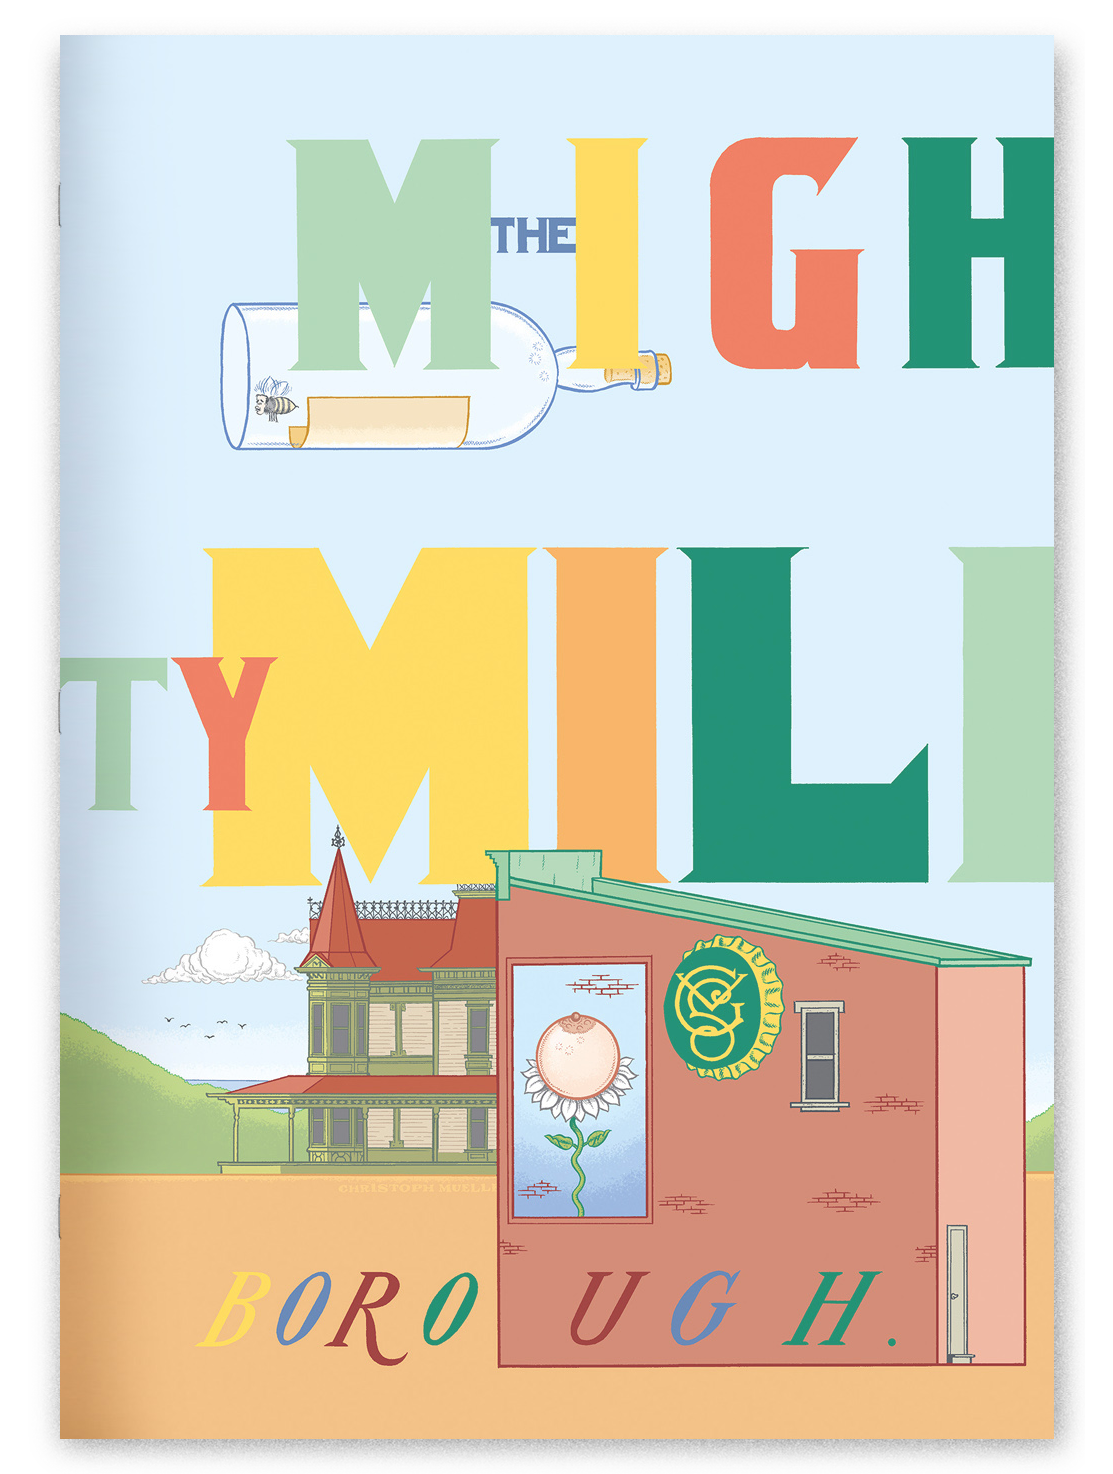 “The Mighty Millborough” self-published in 2016, oversized.